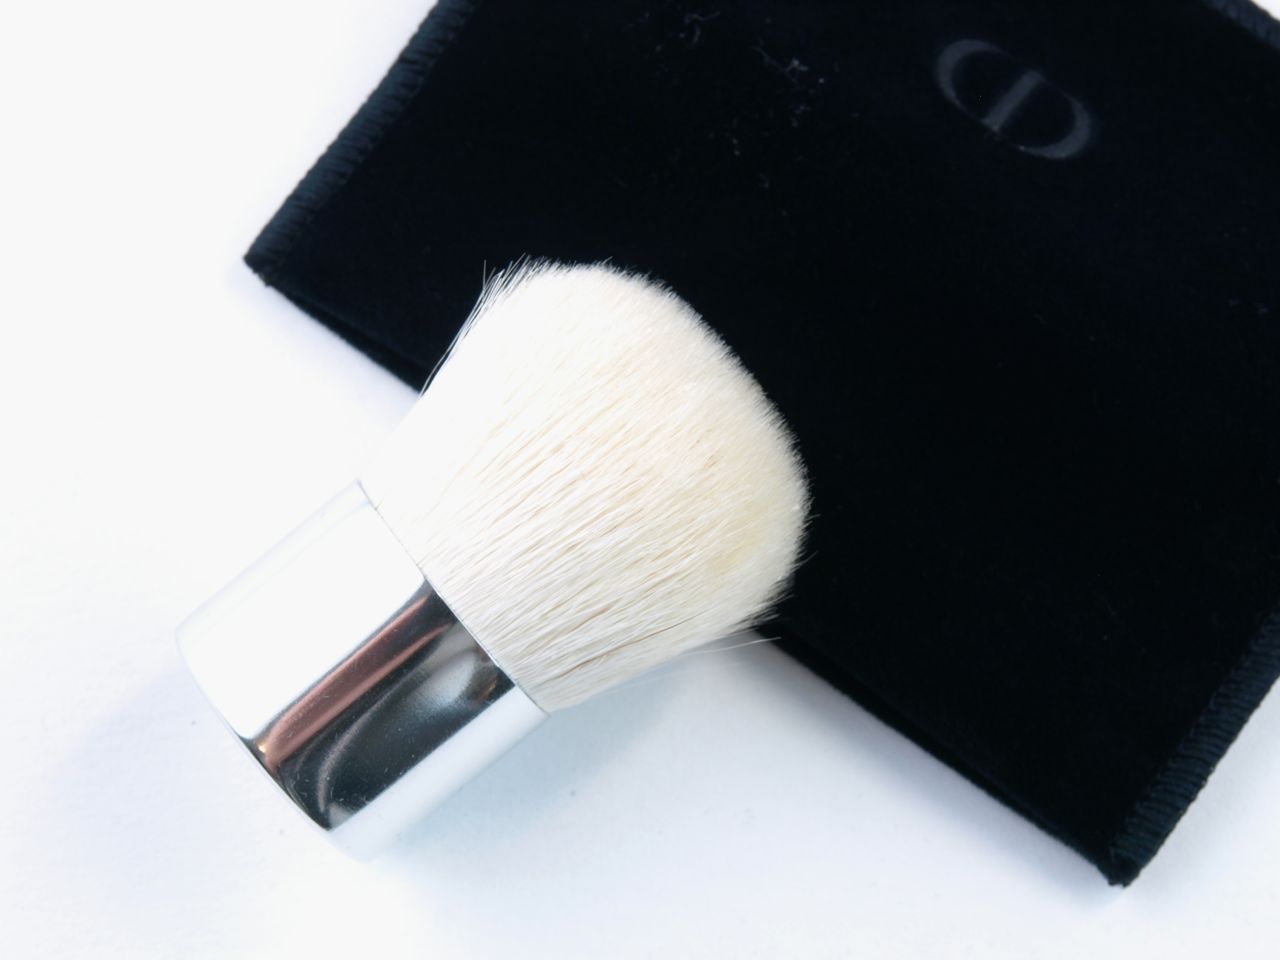 Dior Summer 2015 Tie Dye Collection DiorSkin Nude Tan Blush Harmony: Review and Swatches